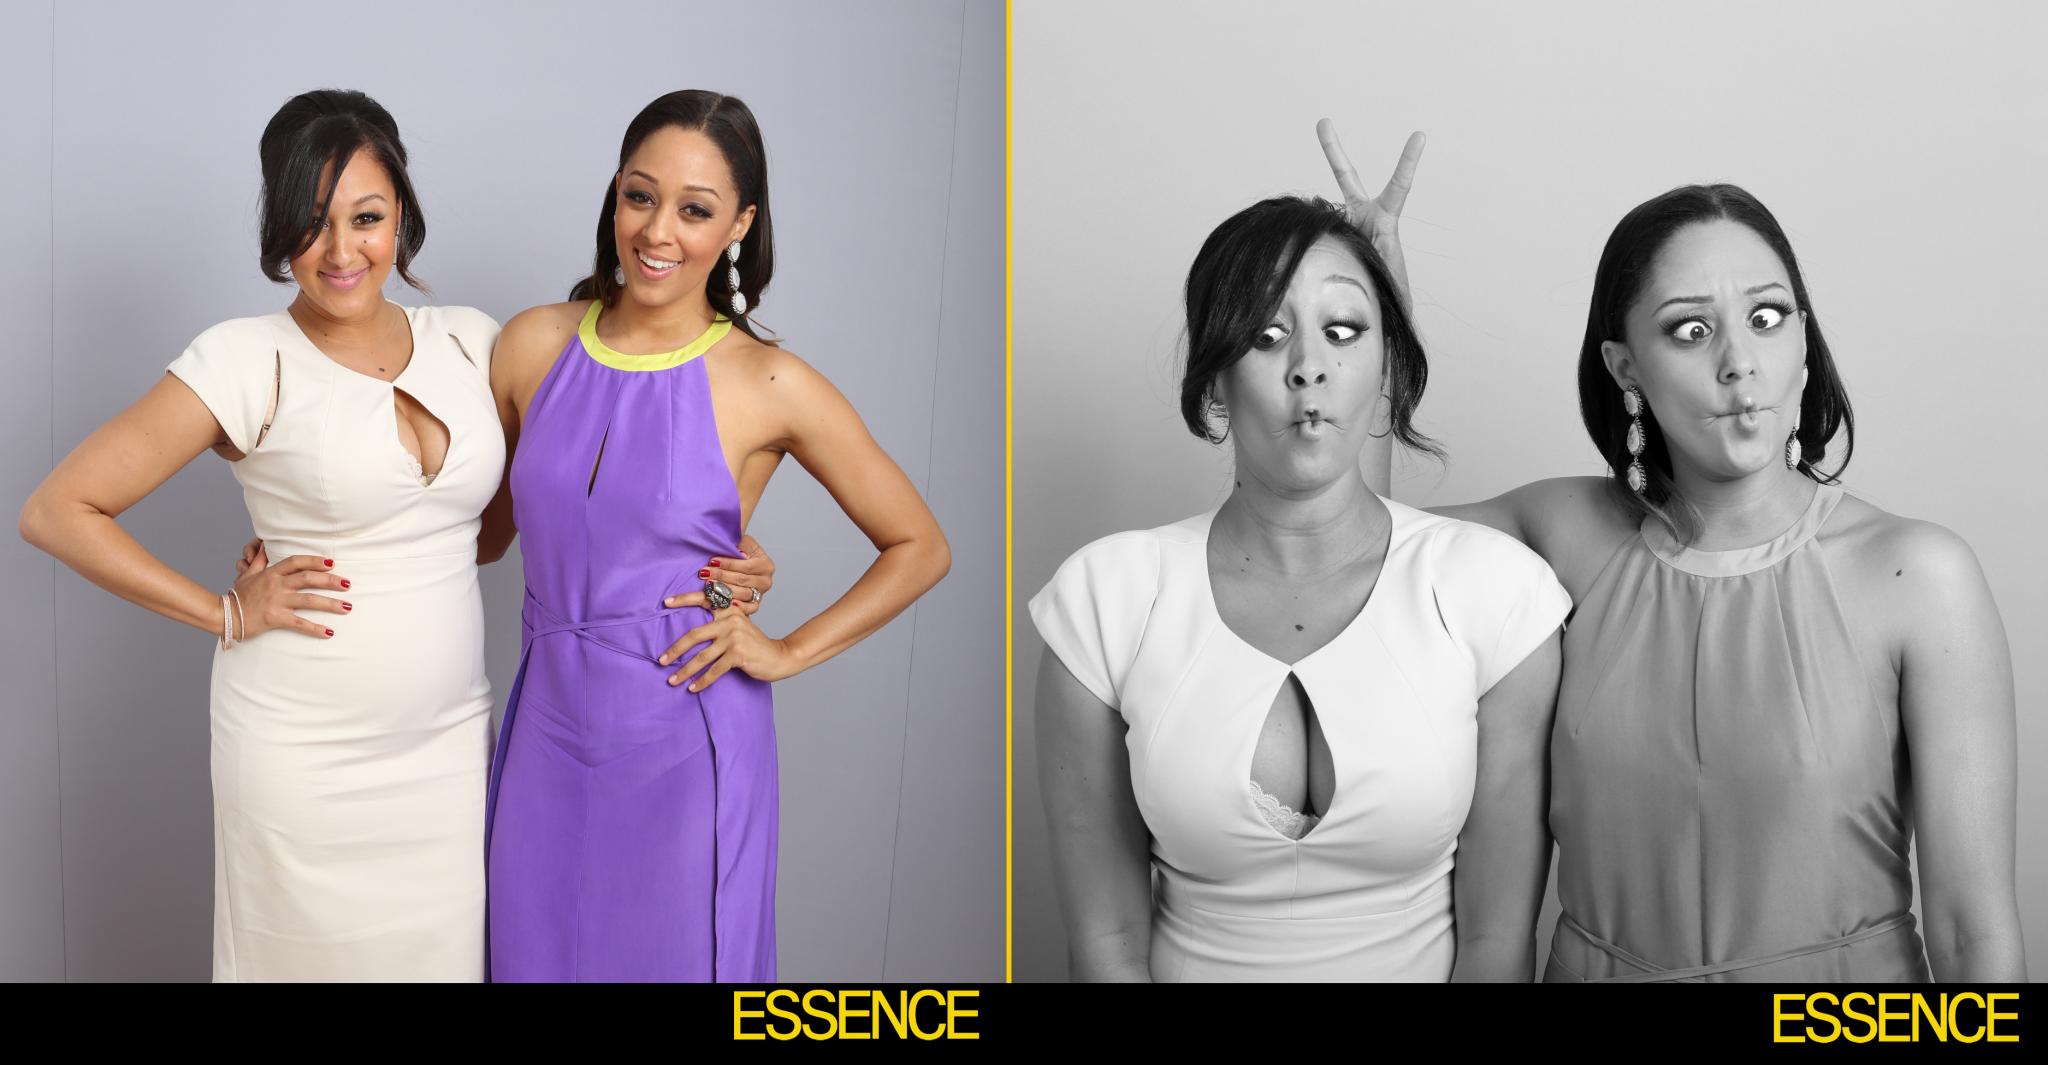 Exclusive: ESSENCE 2013 'Black Women in Hollywood' Photo Booth